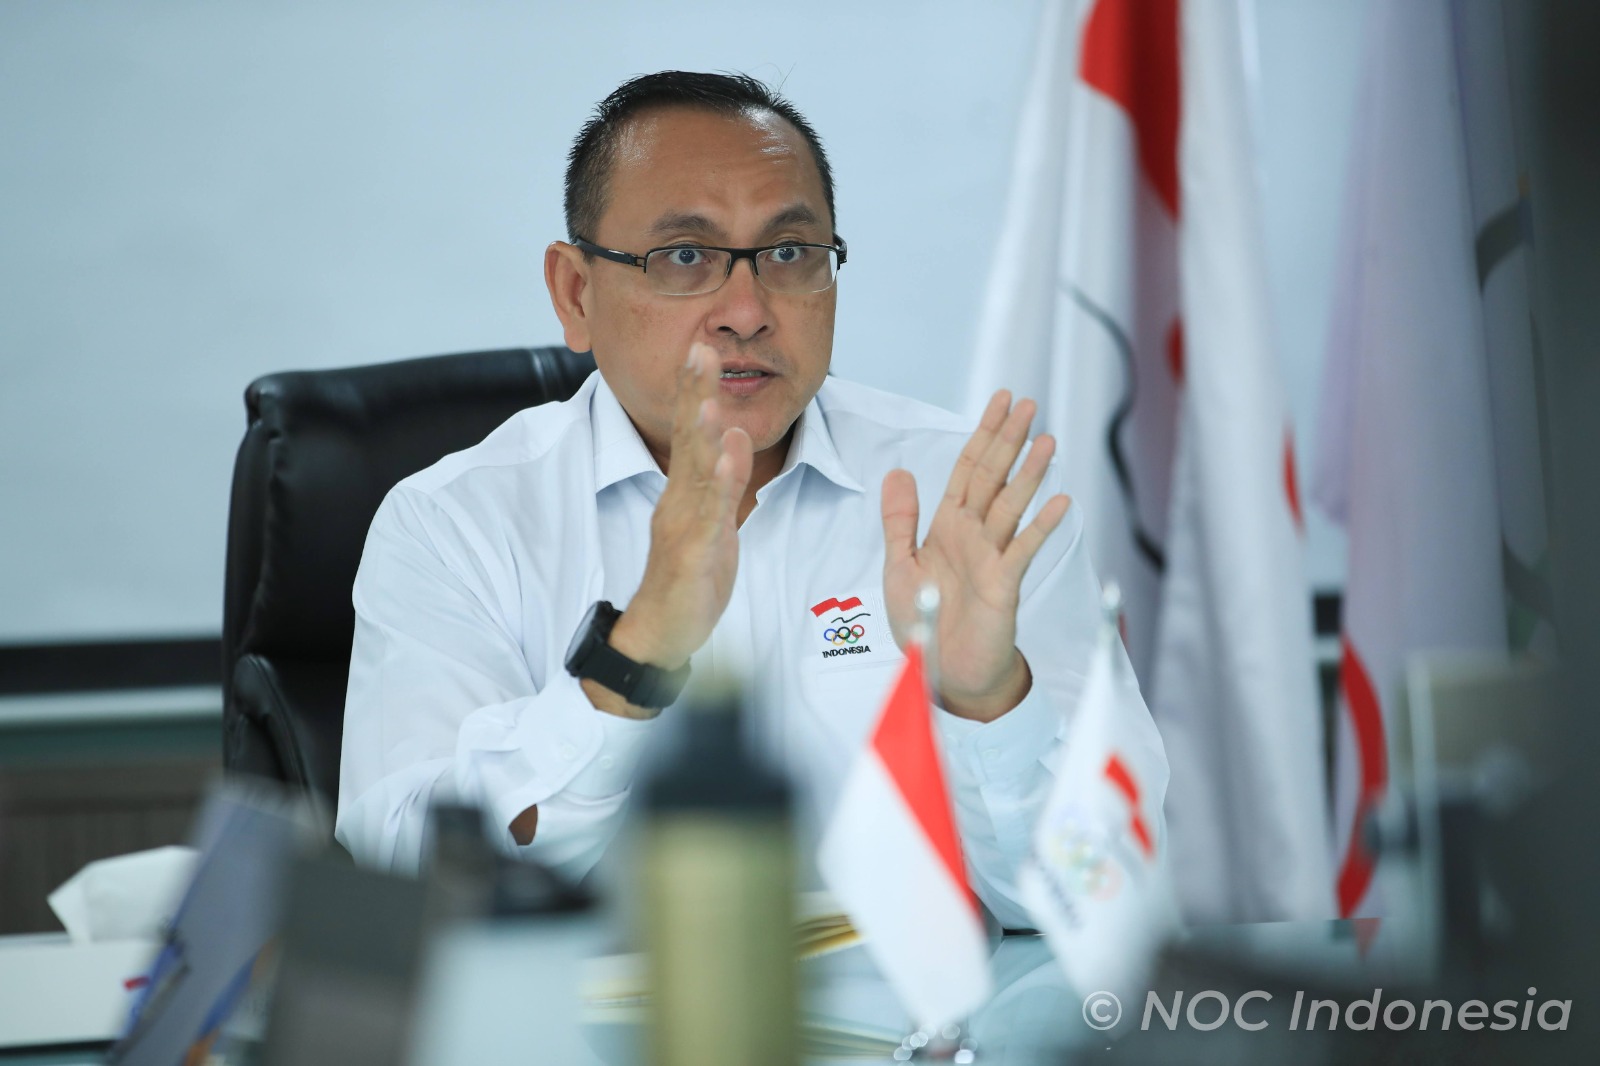 Indonesia Olympic Commitee - NOC Indonesia announces Congress on June 30, 2023 in Jakarta